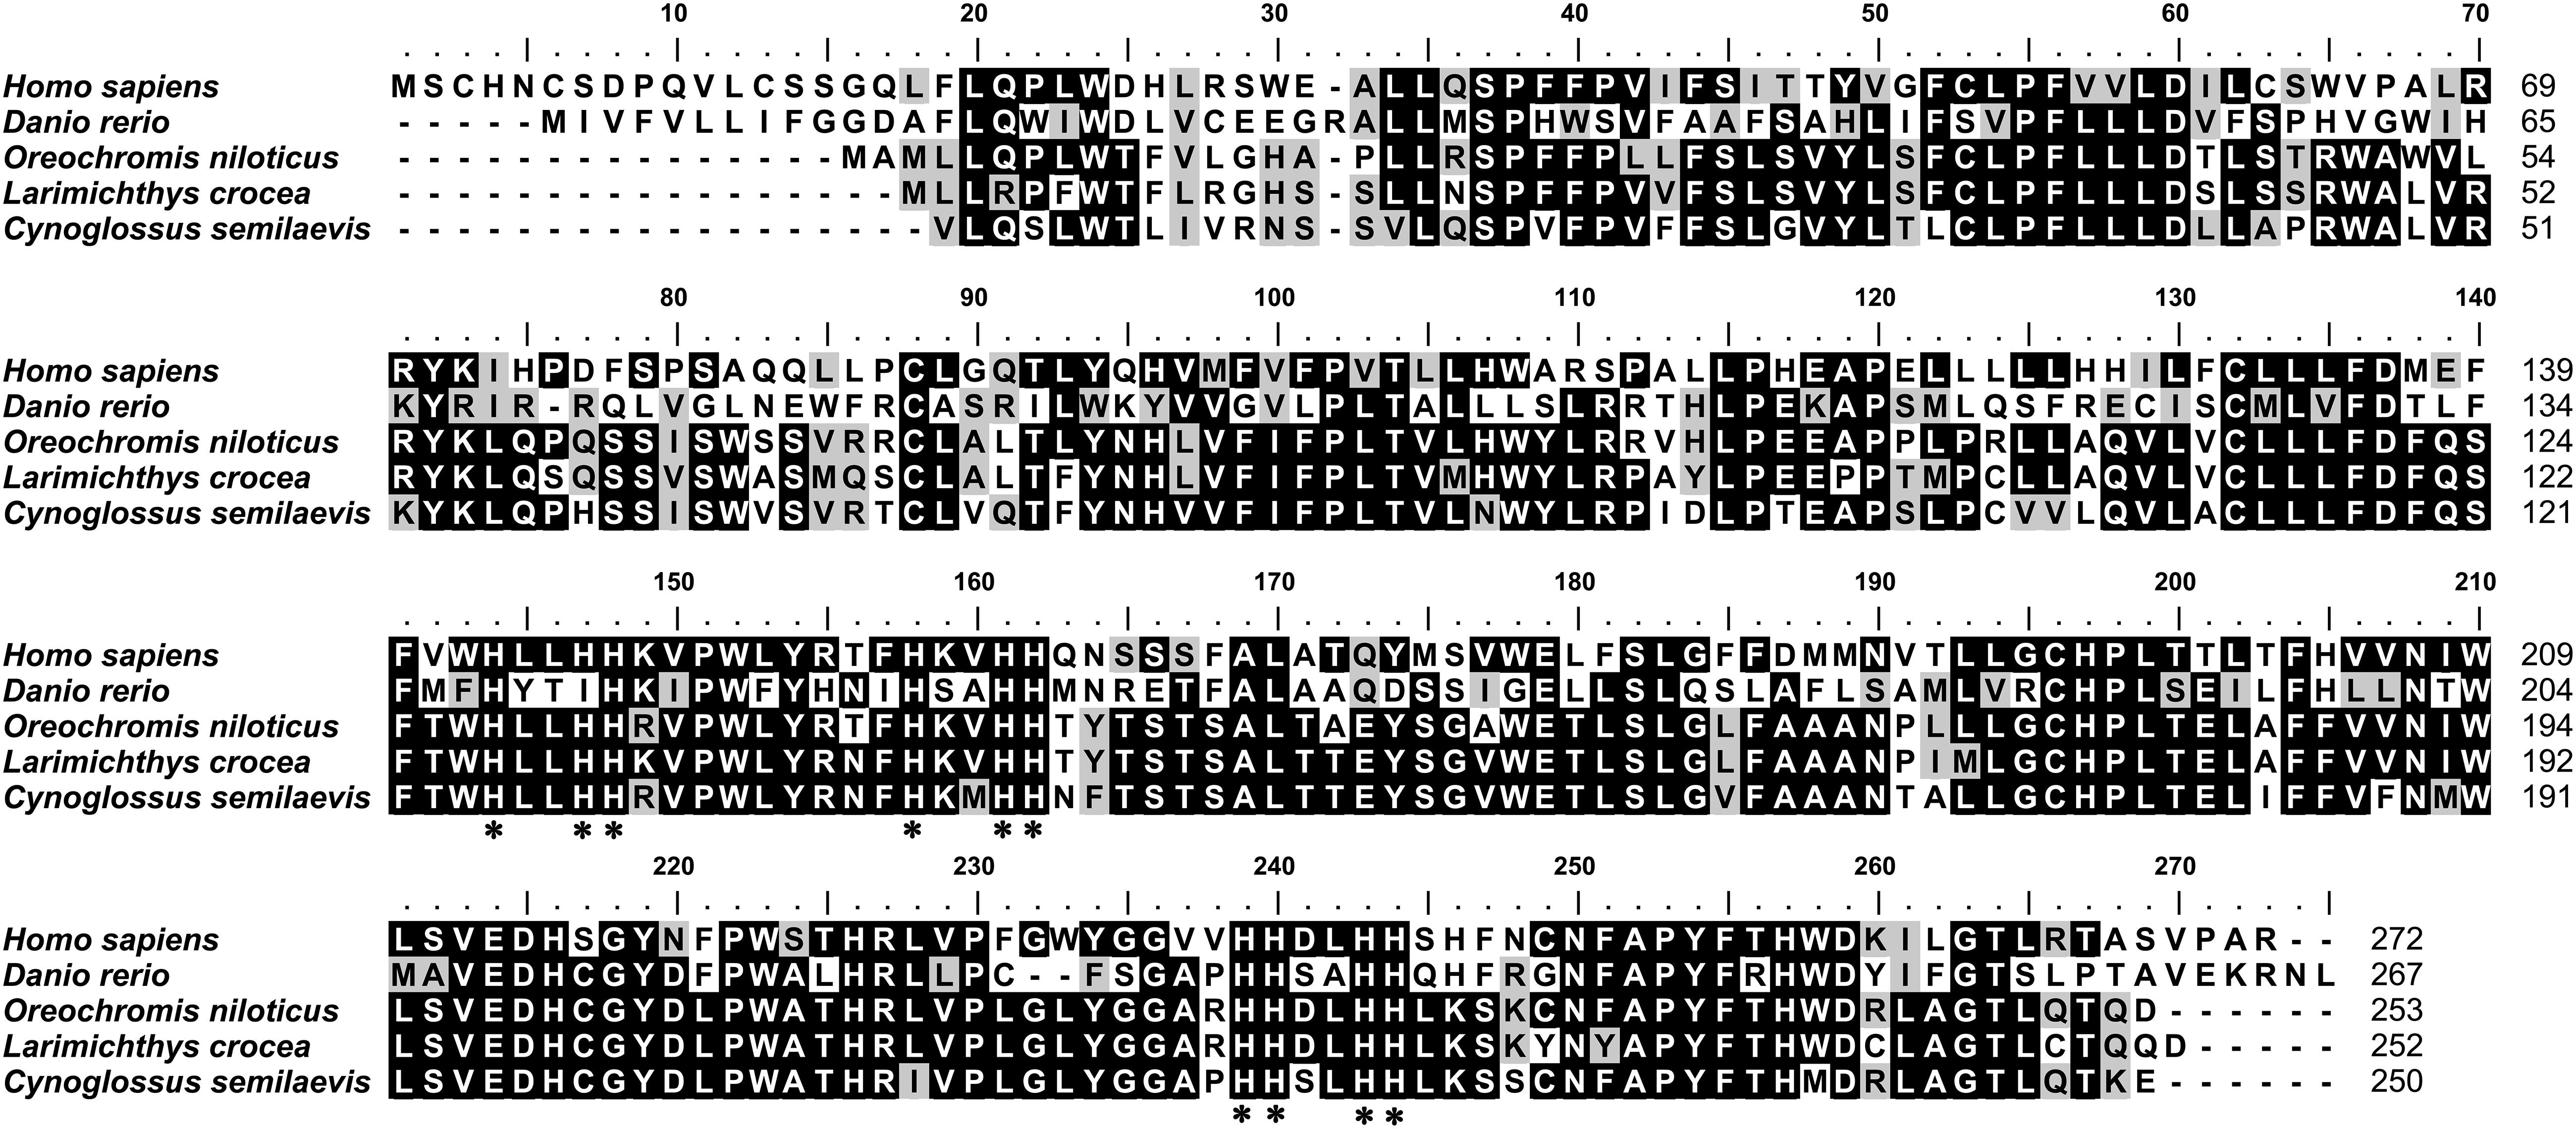 Frontiers | Cloning and Characterization of Cholesterol 25-Hydroxylase (ch25h) From a Marine Chinese Tongue Sole semilaevis), and Its Gene Expressions in Response to Dietary Arachidonic Acid | Marine